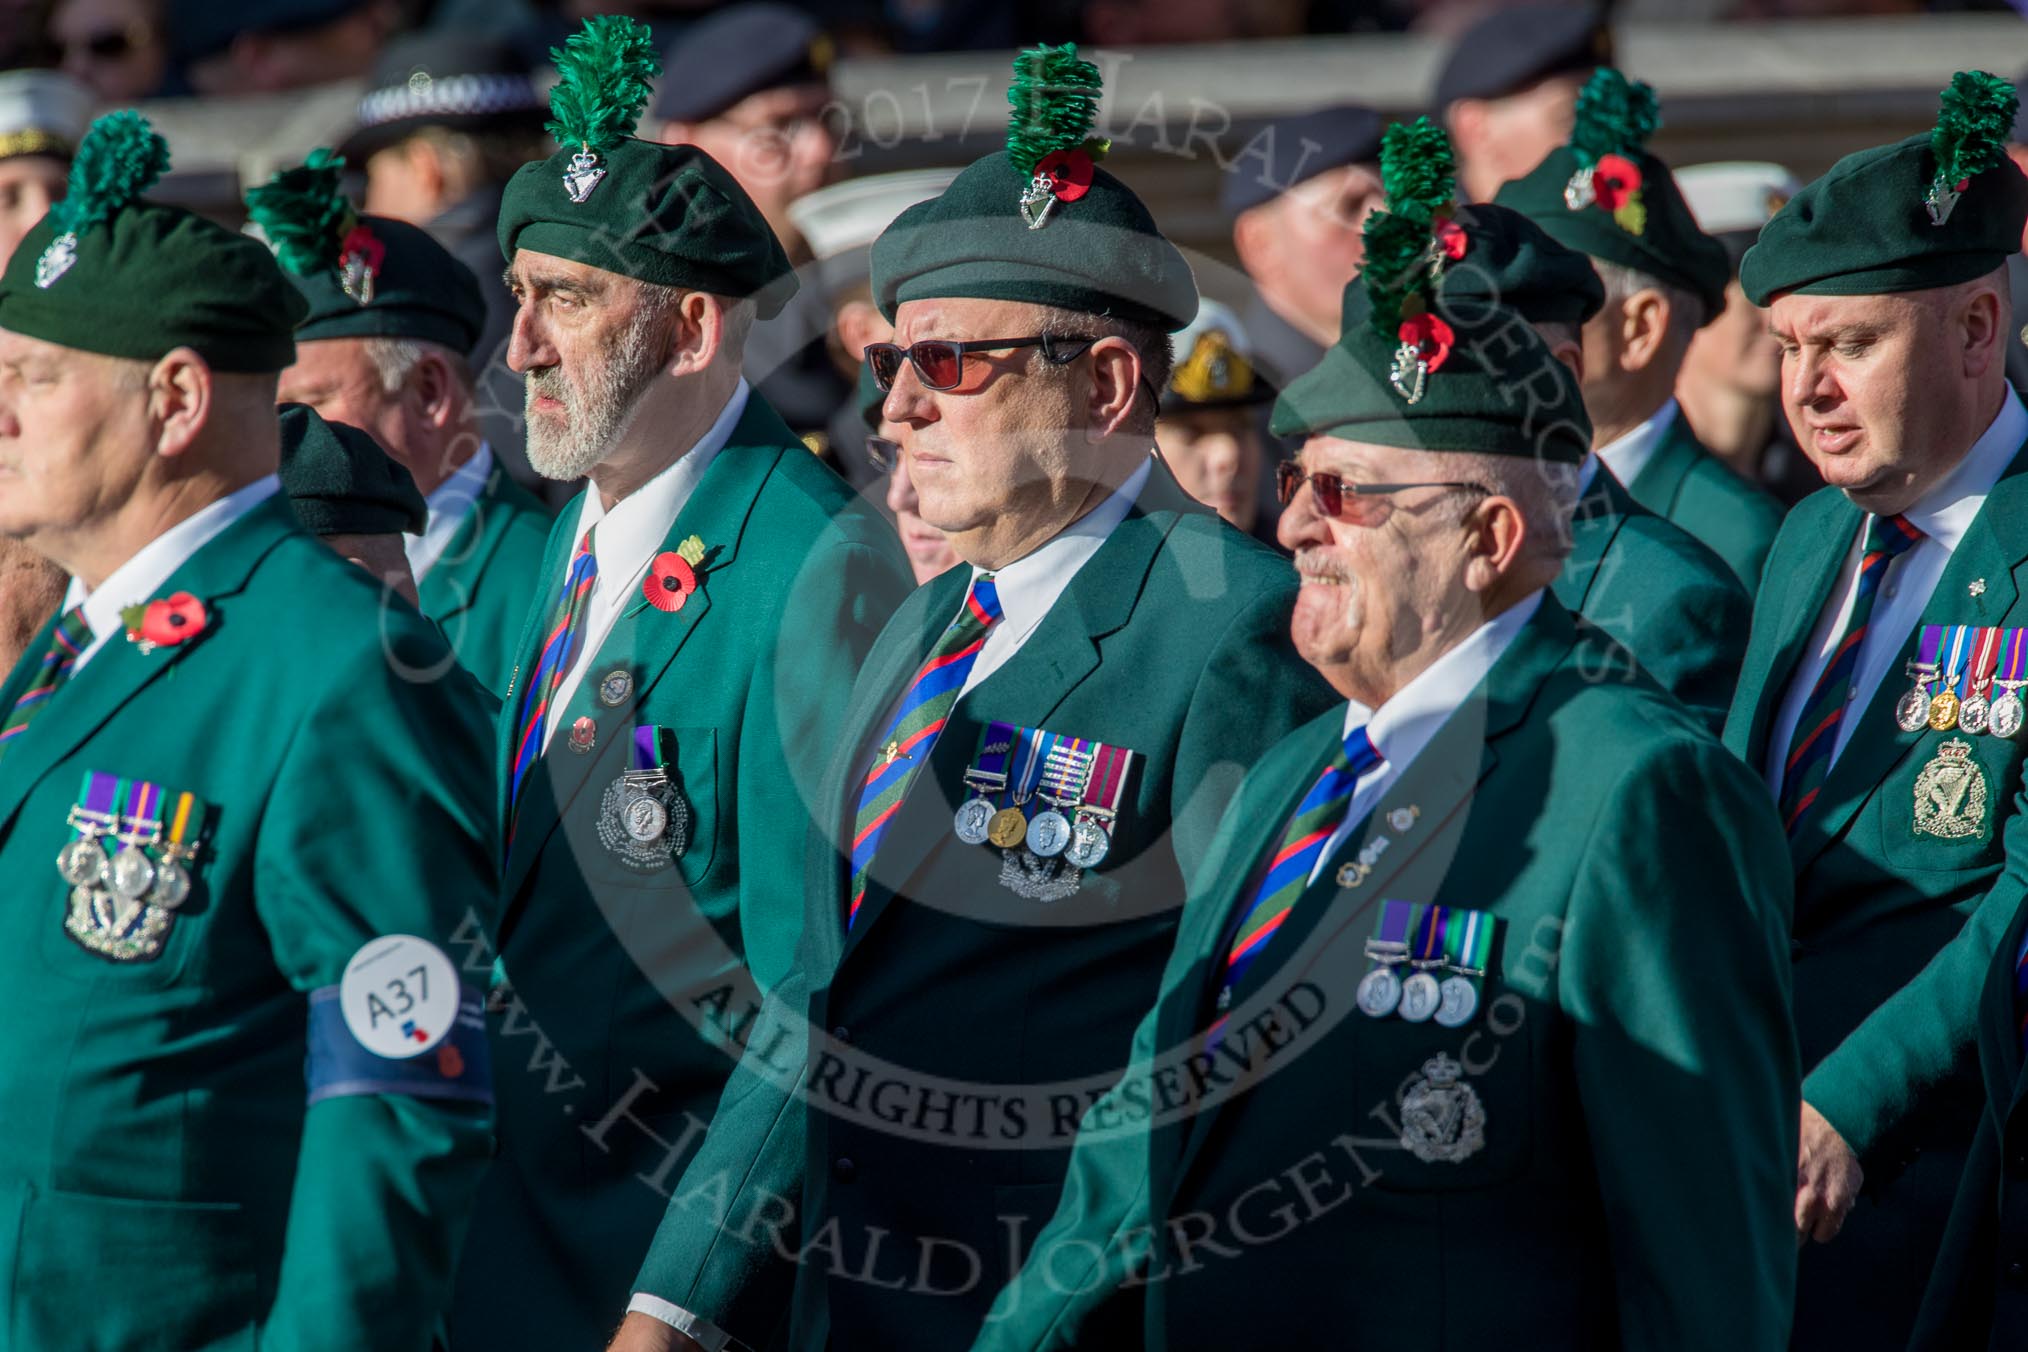 Regimental Association  of the Royal Irish Association (Group A37, 39 members) during the Royal British Legion March Past on Remembrance Sunday at the Cenotaph, Whitehall, Westminster, London, 11 November 2018, 12:02.